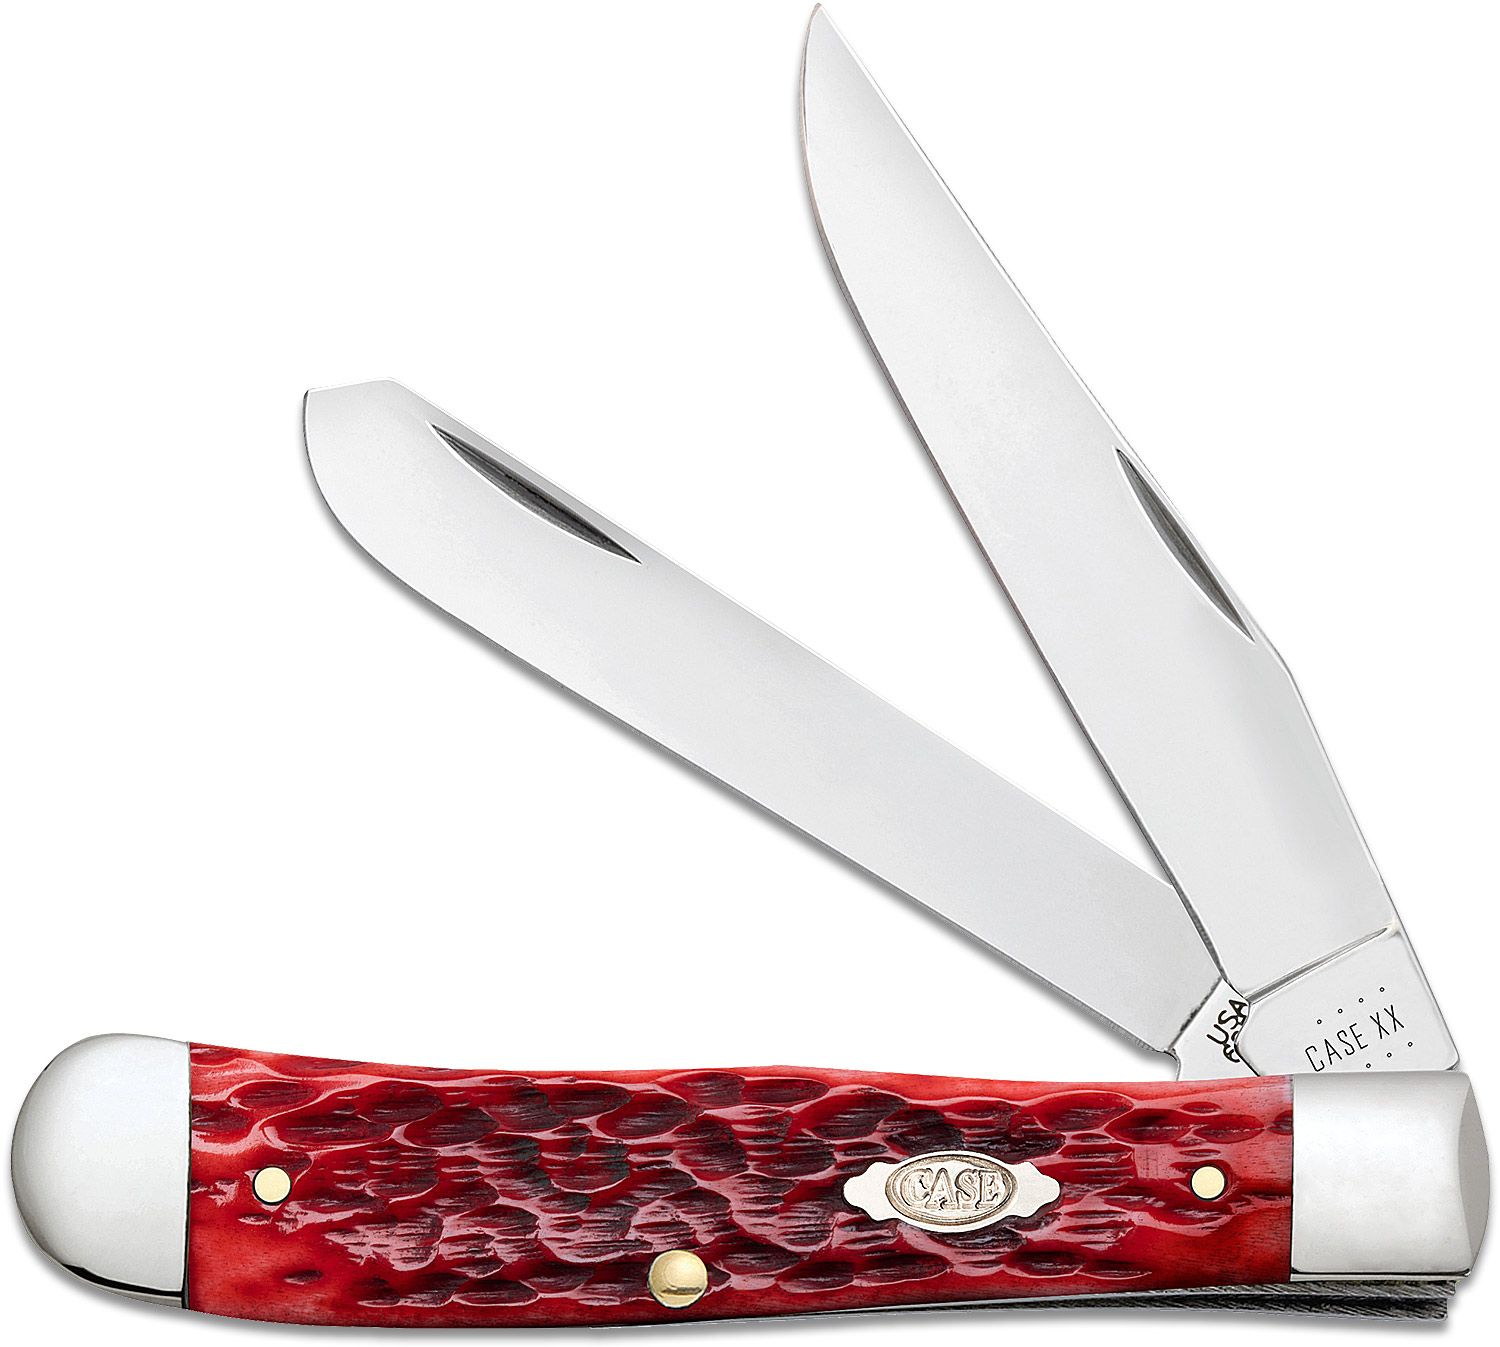 Case XX Merry Christmas Peppermint Corelon Trapper Stainless Knives